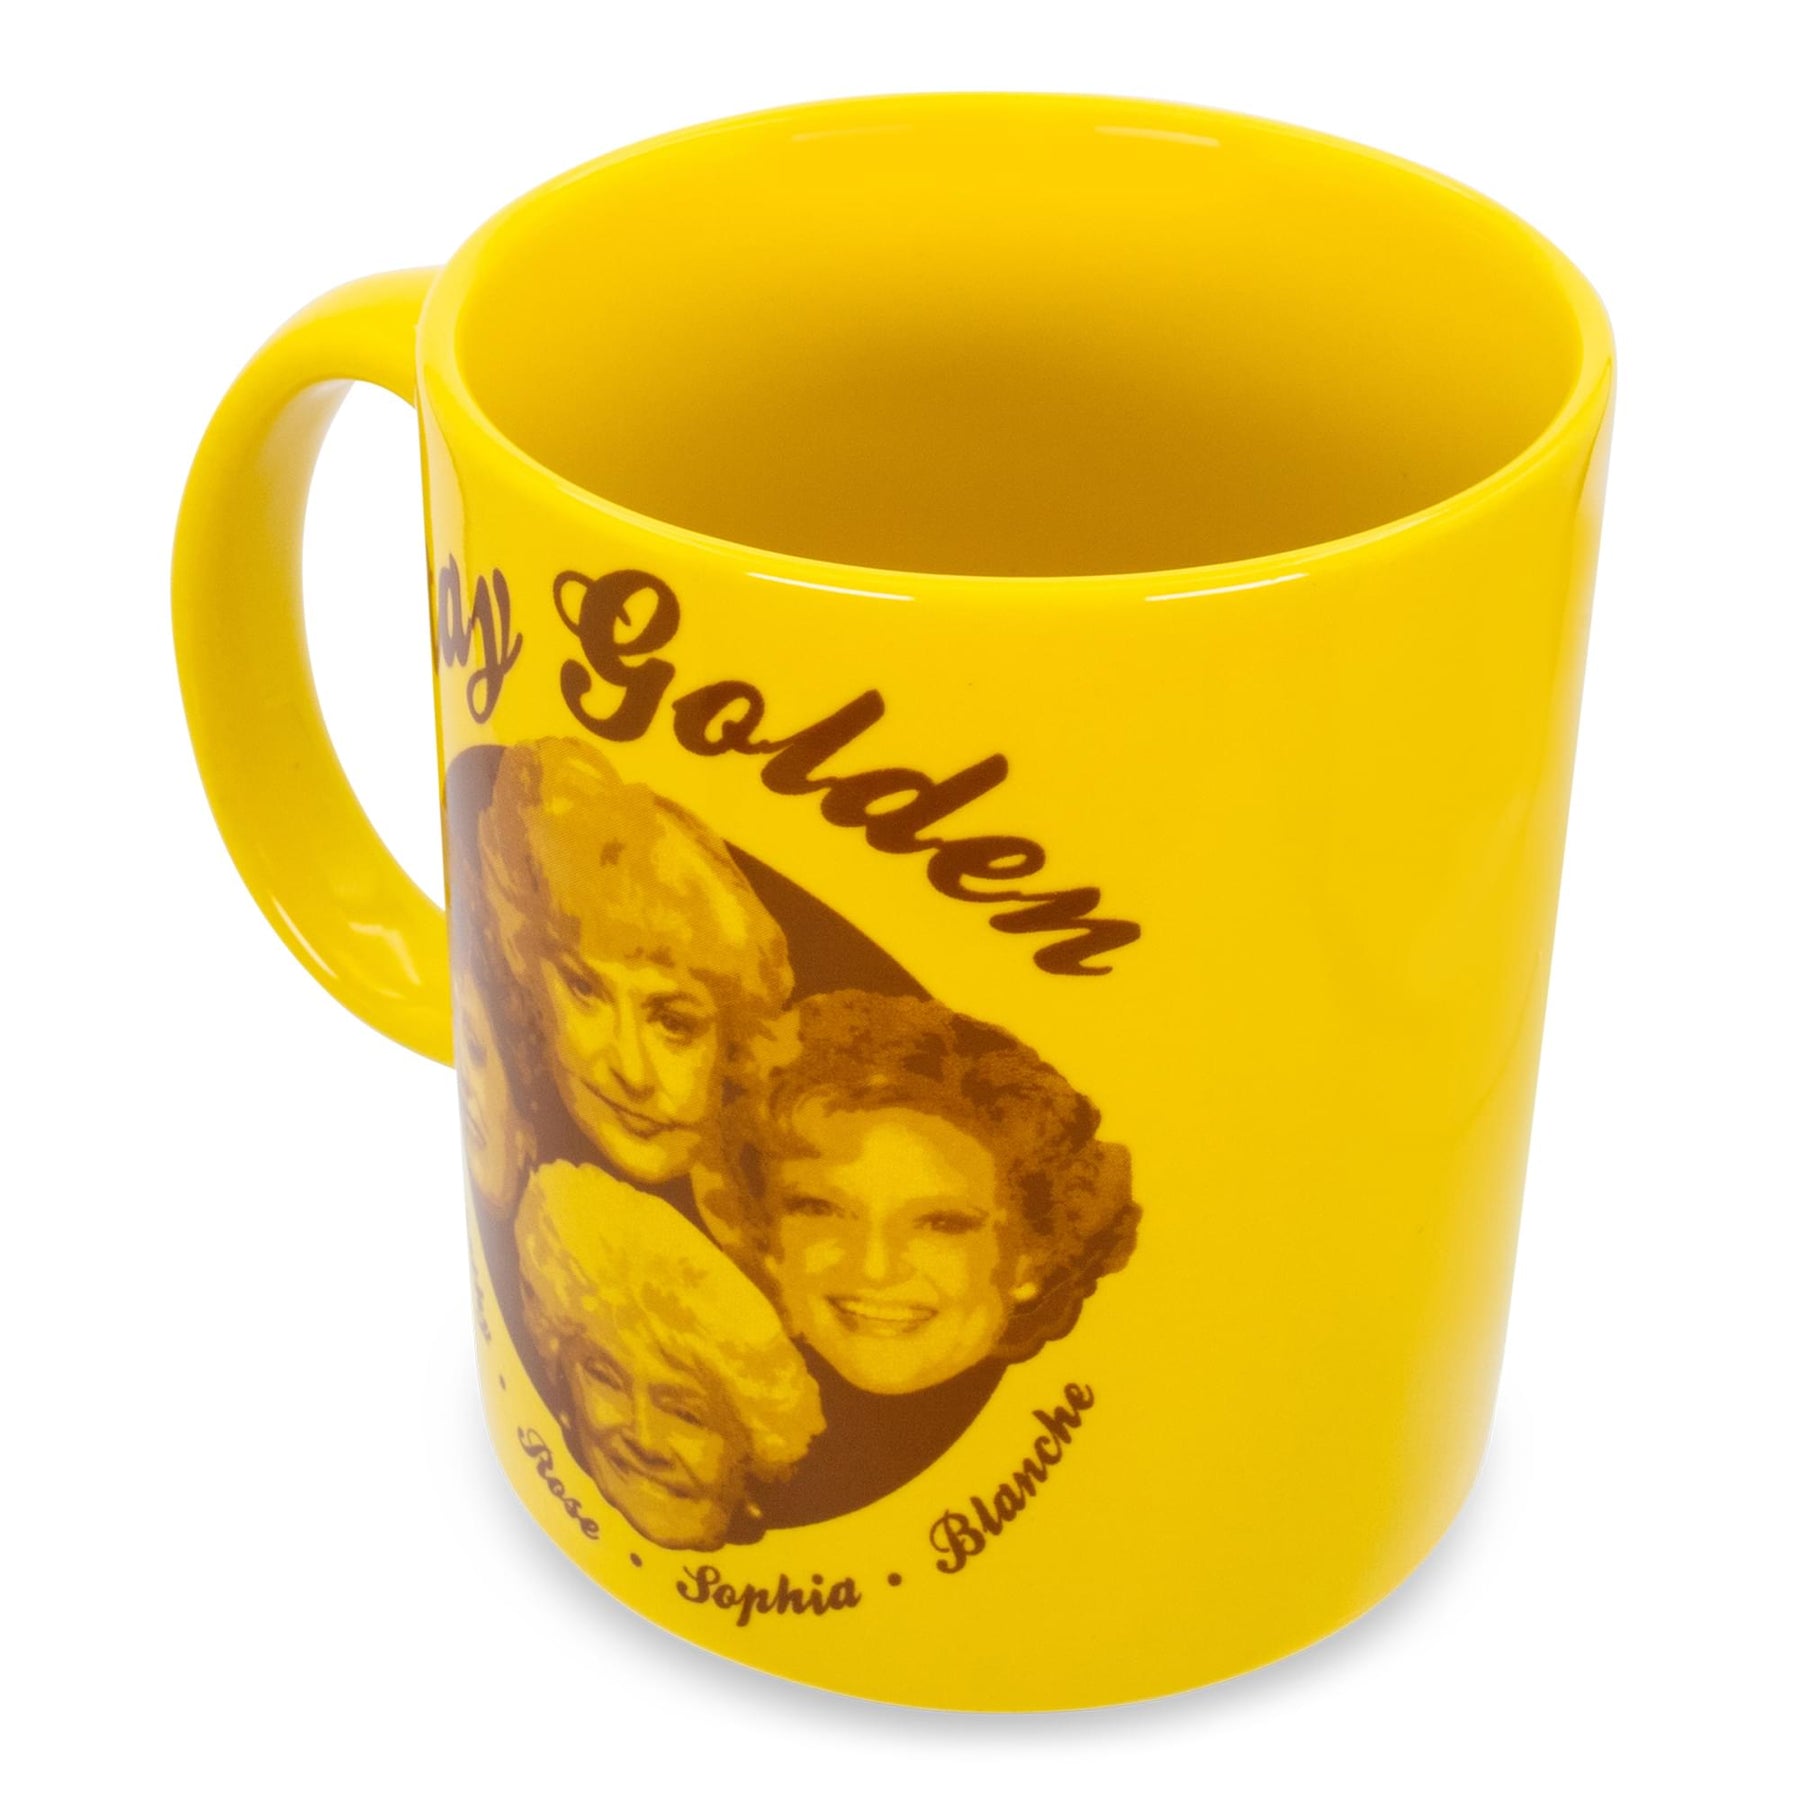 The Golden Girls "Stay Golden" Gold Ceramic Coffee Mug | Holds 20 Ounces